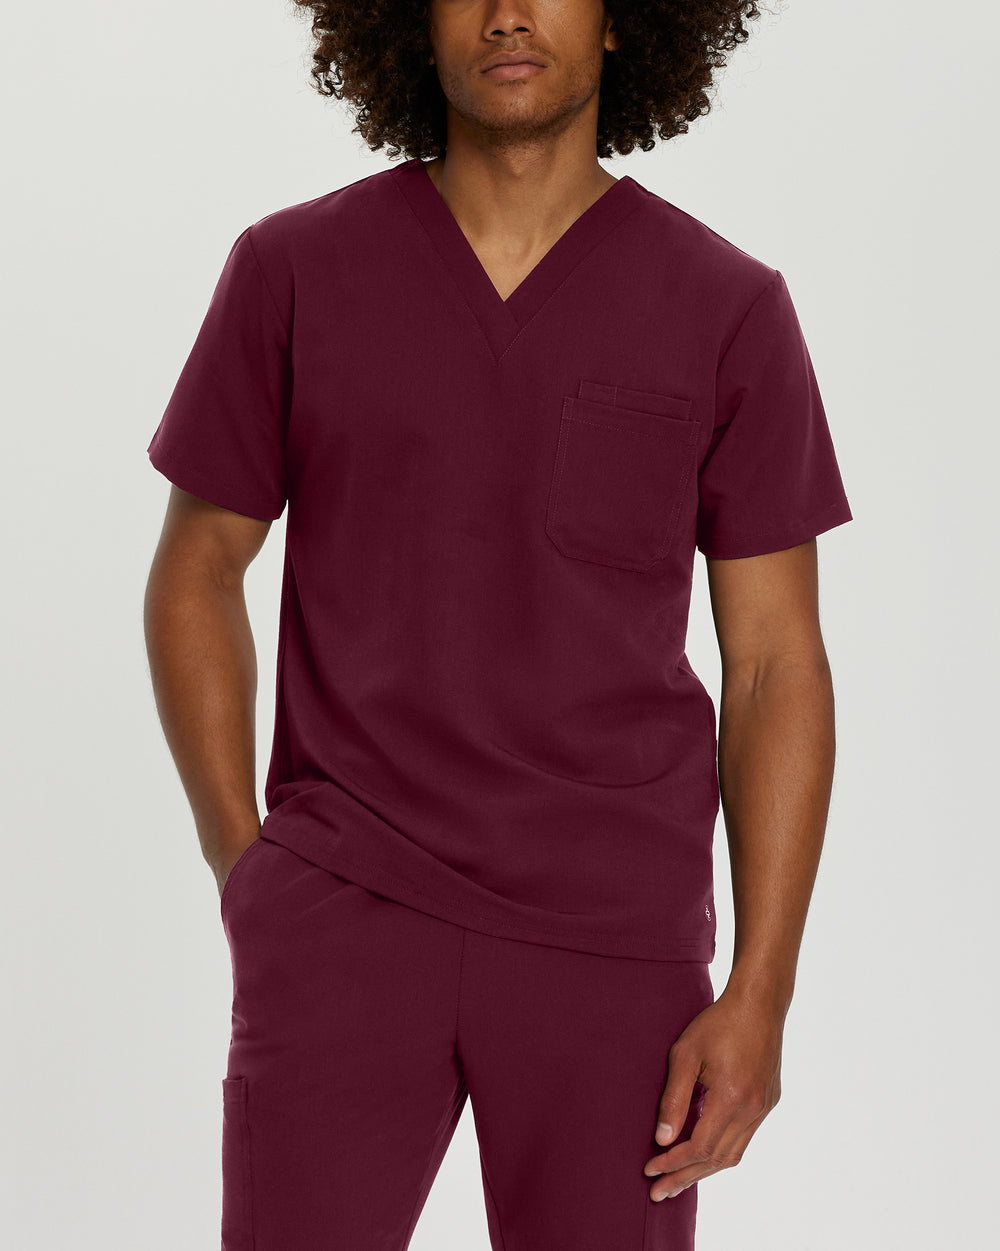 Men's top with two pockets - V-TESS - 2206